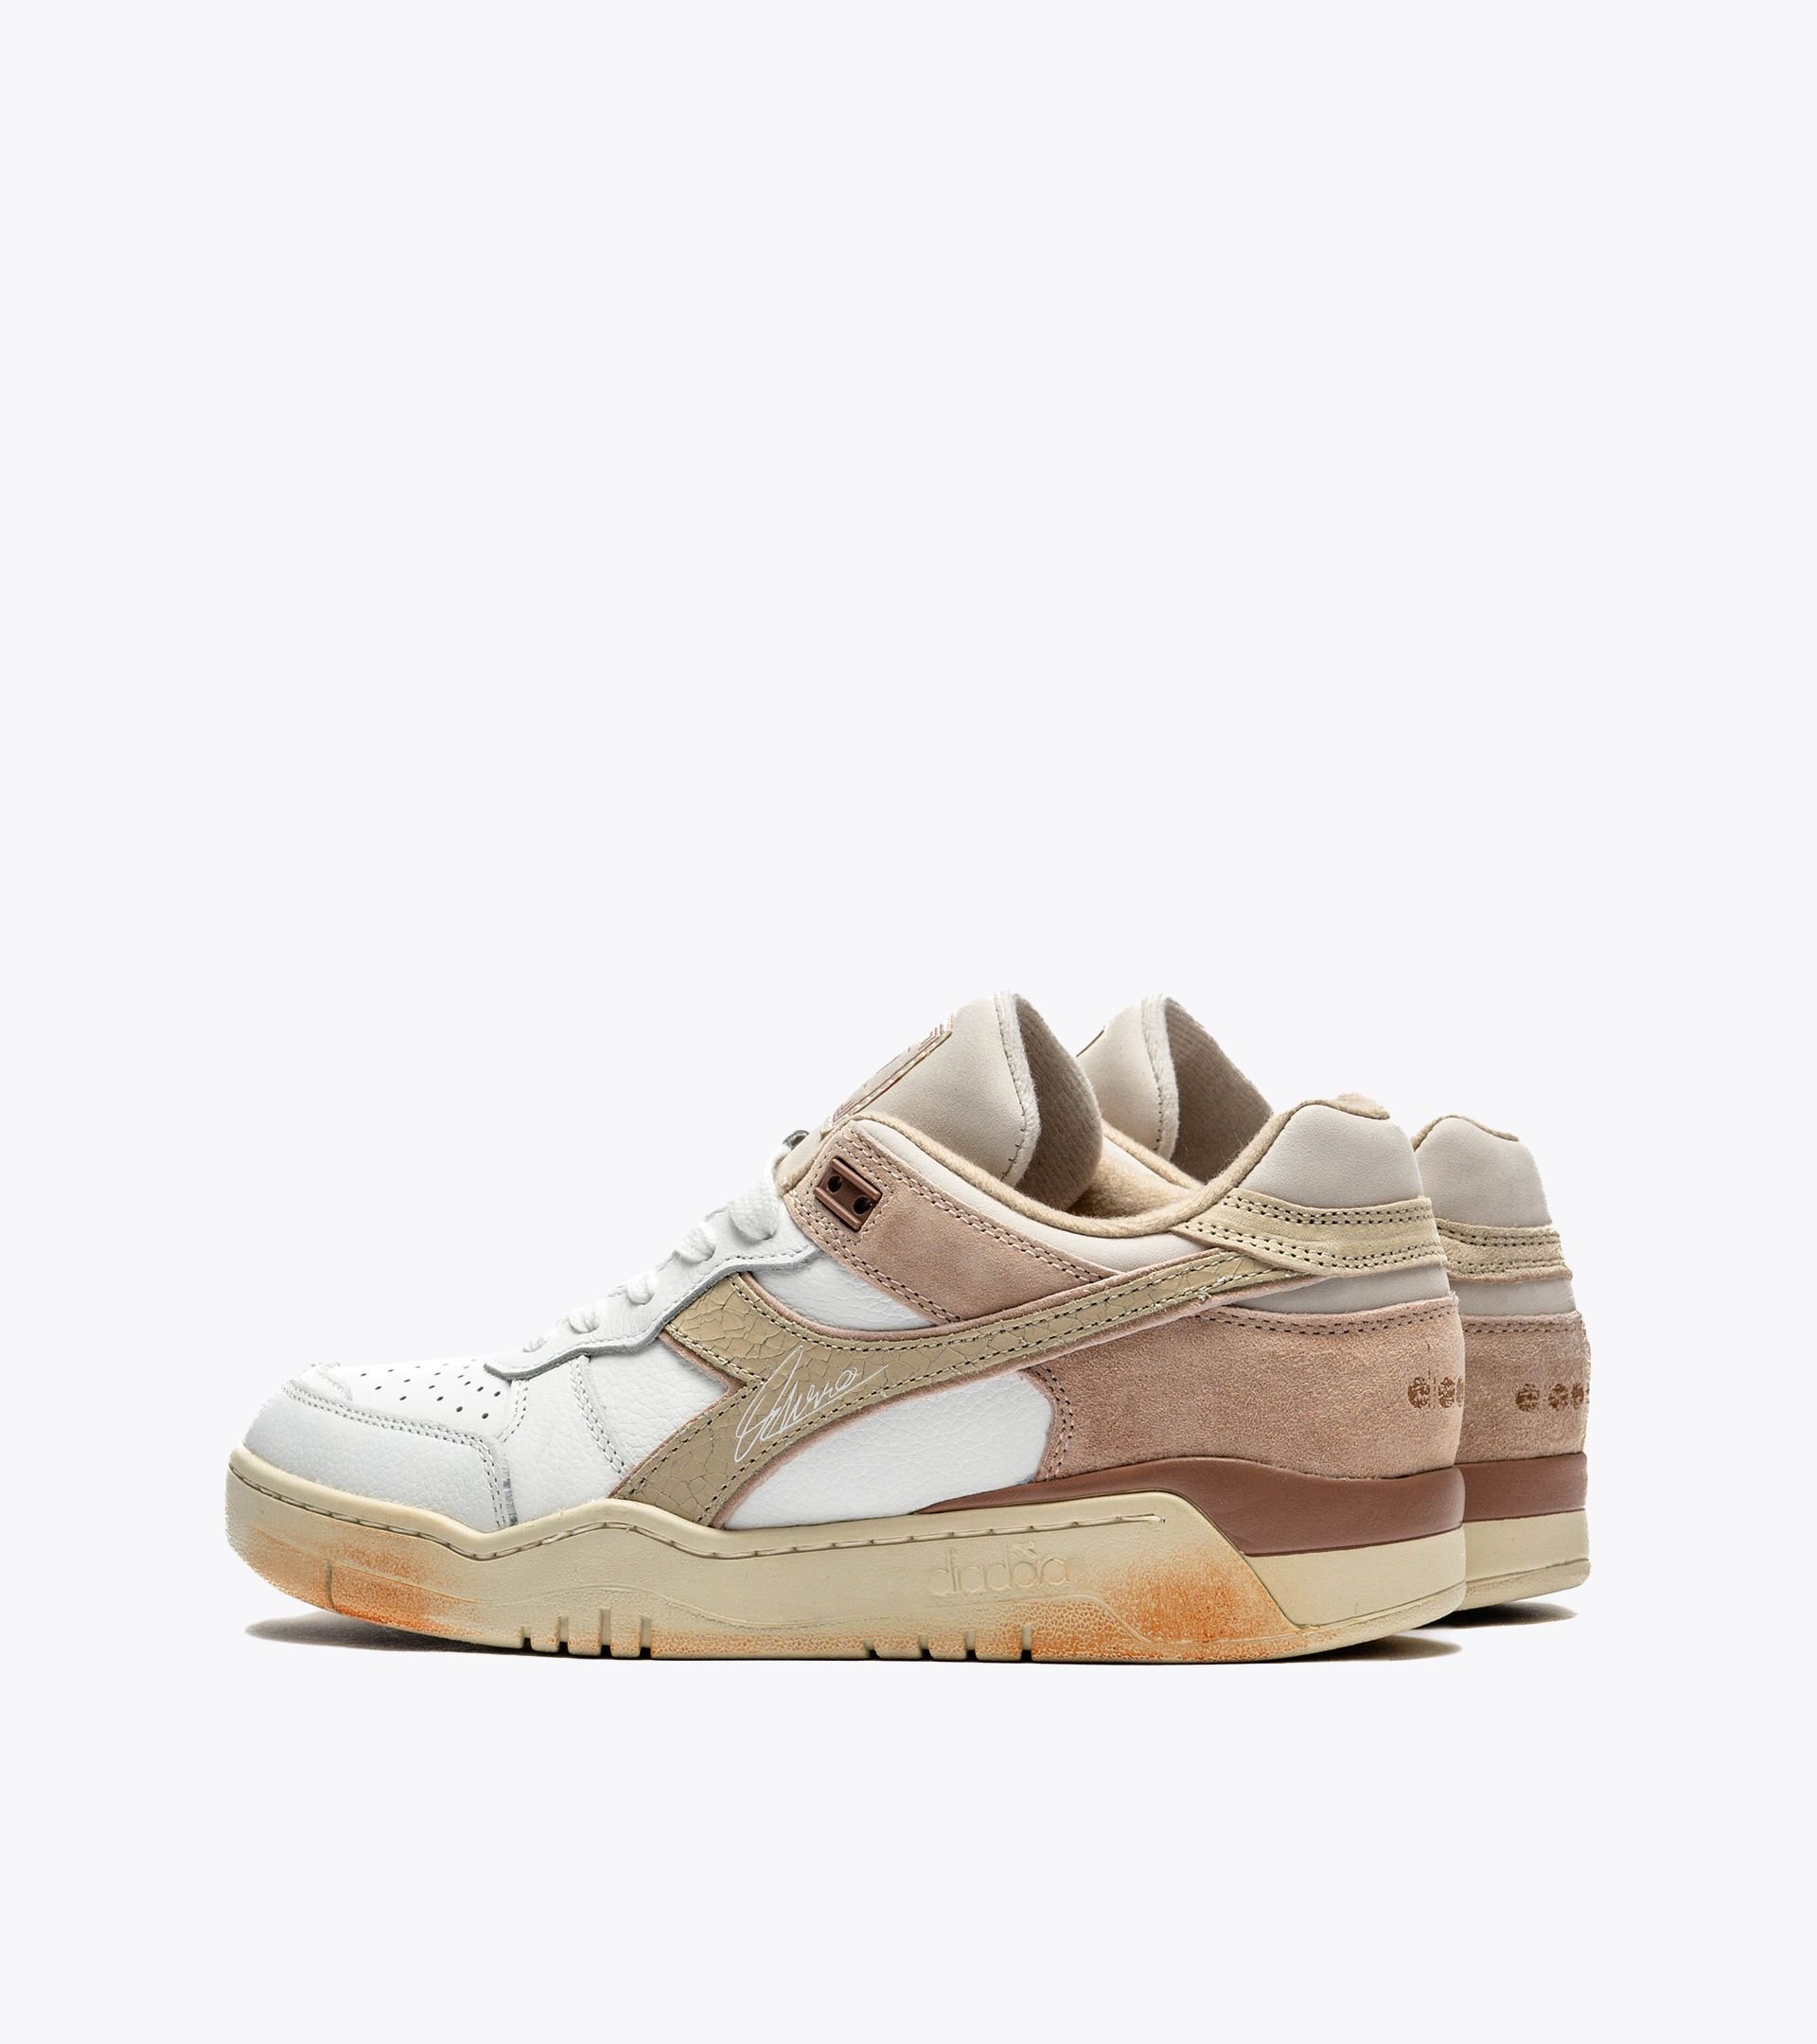 Made in Italy shoe - Gender neutral B.560 DINO RUSSO WHITE/SANDSHELL - Diadora